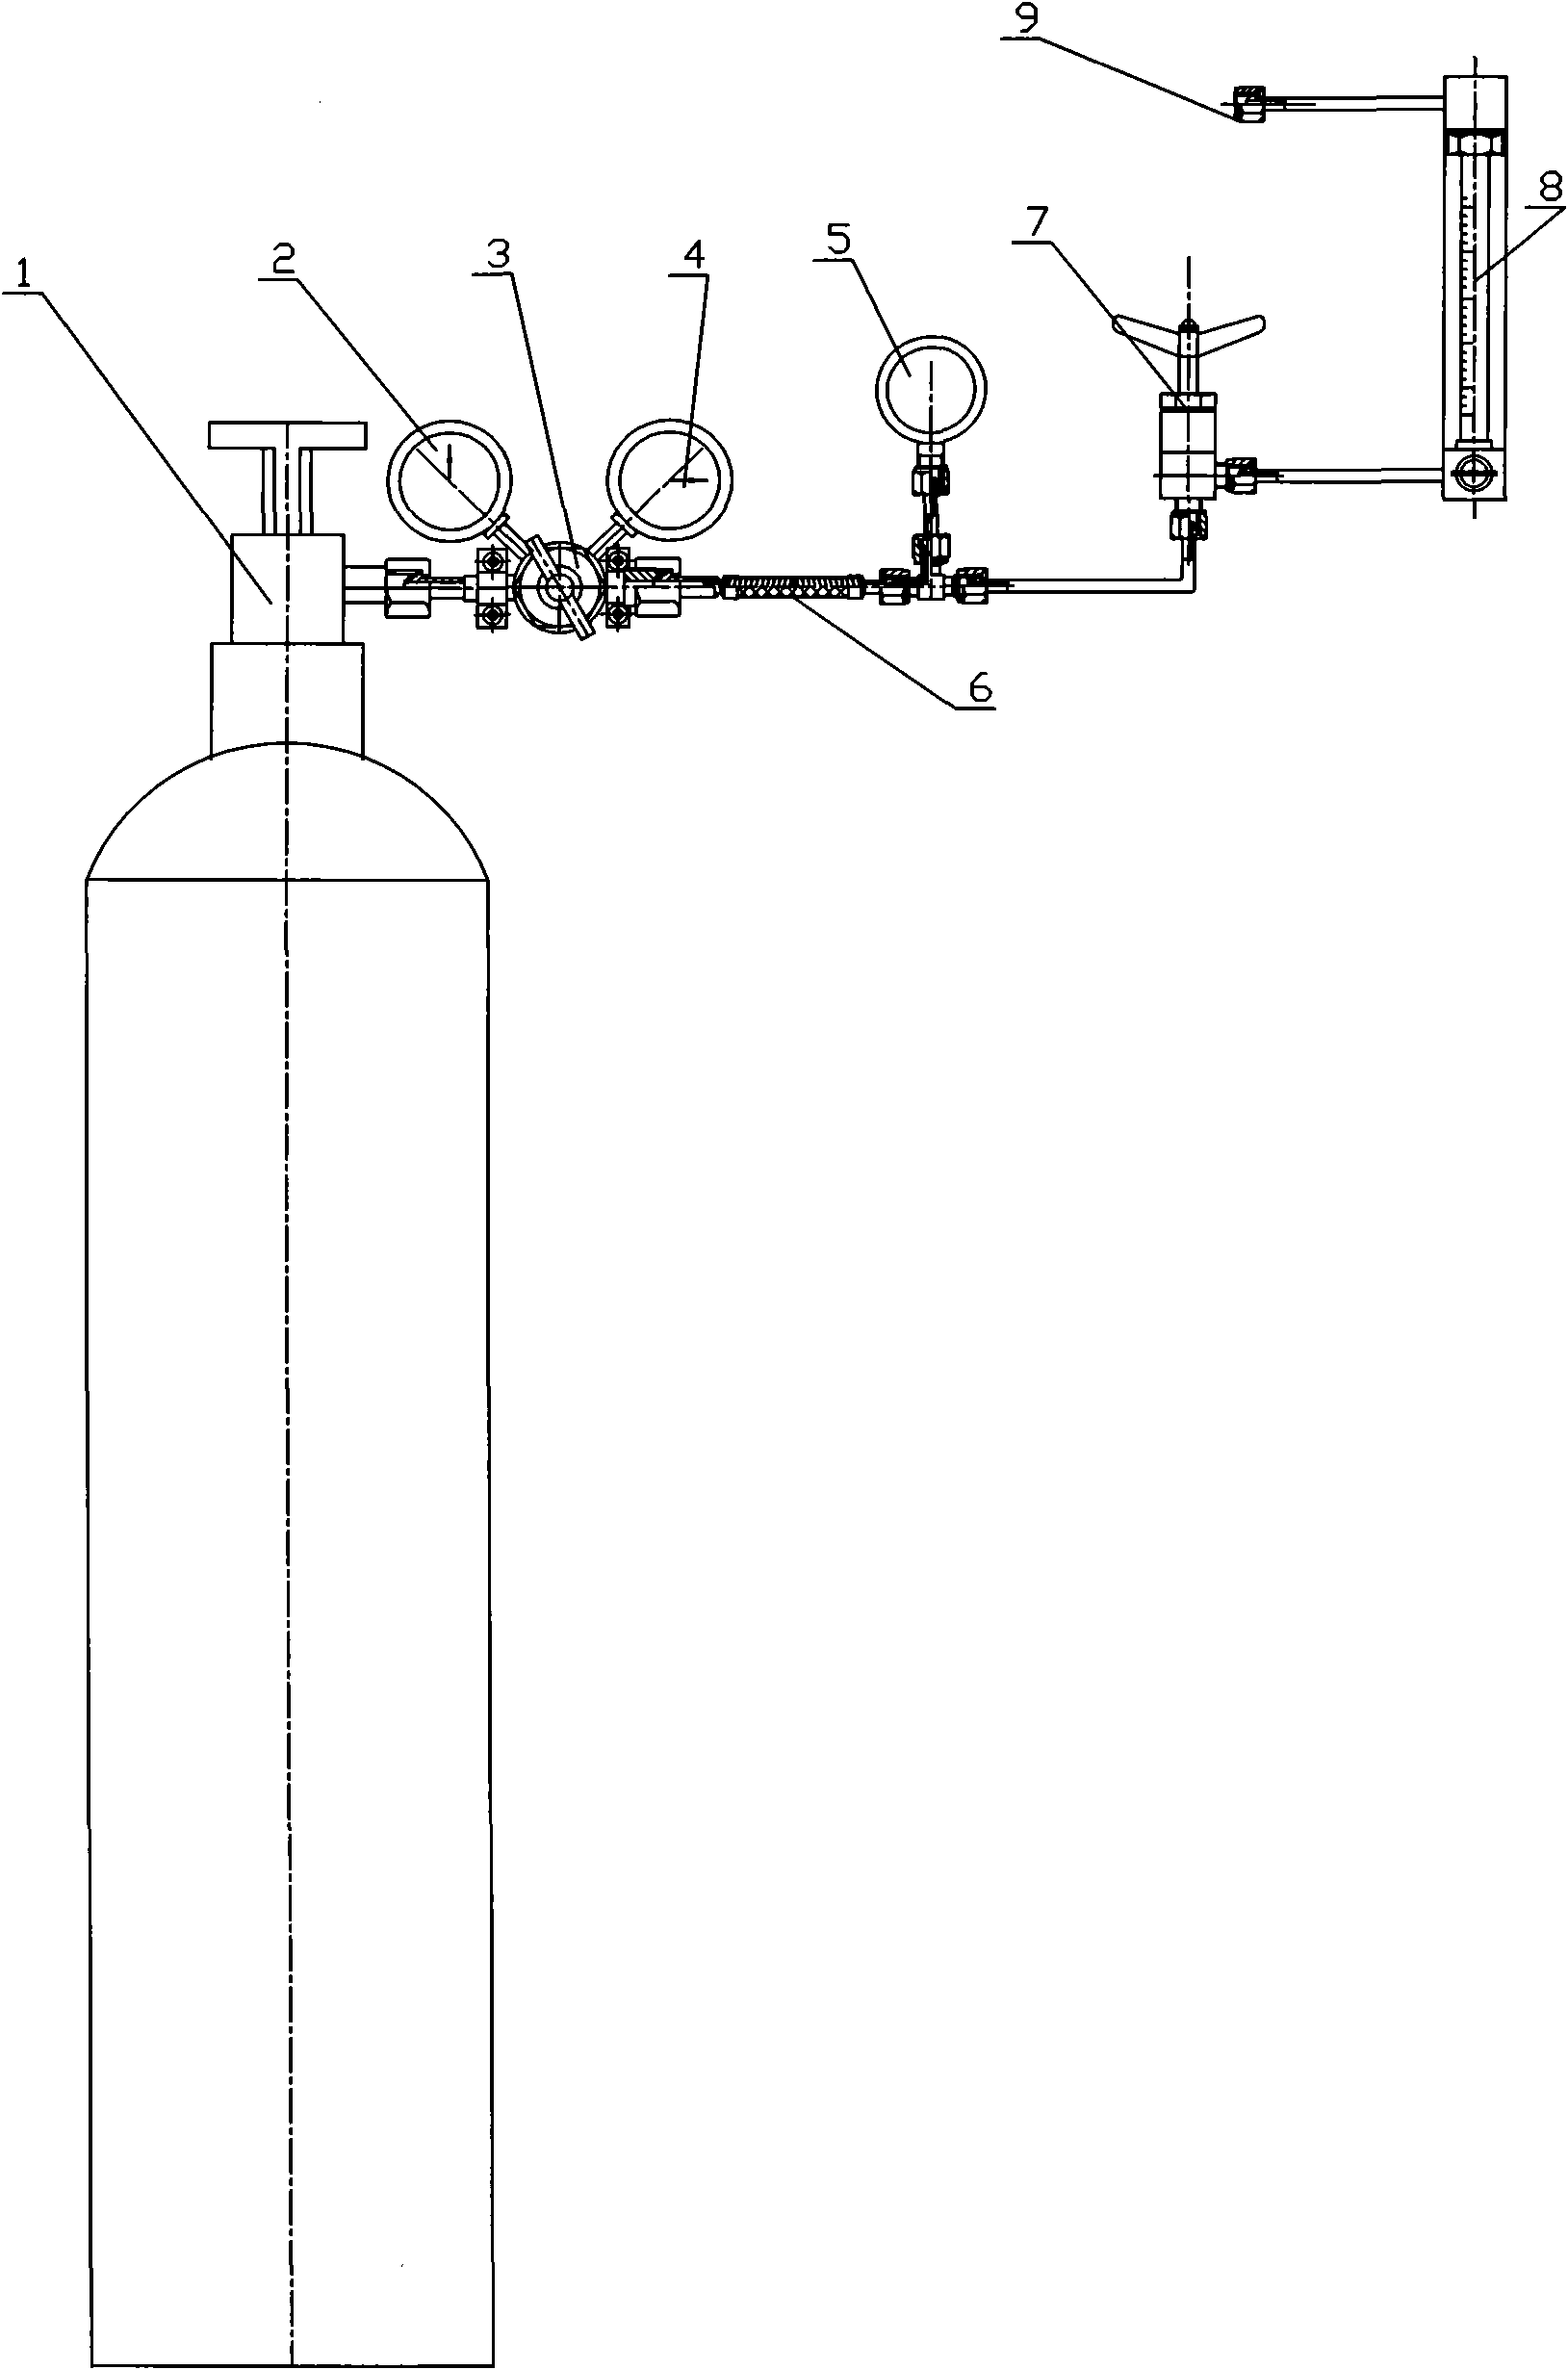 An oxygen supply apparatus for underground shelter